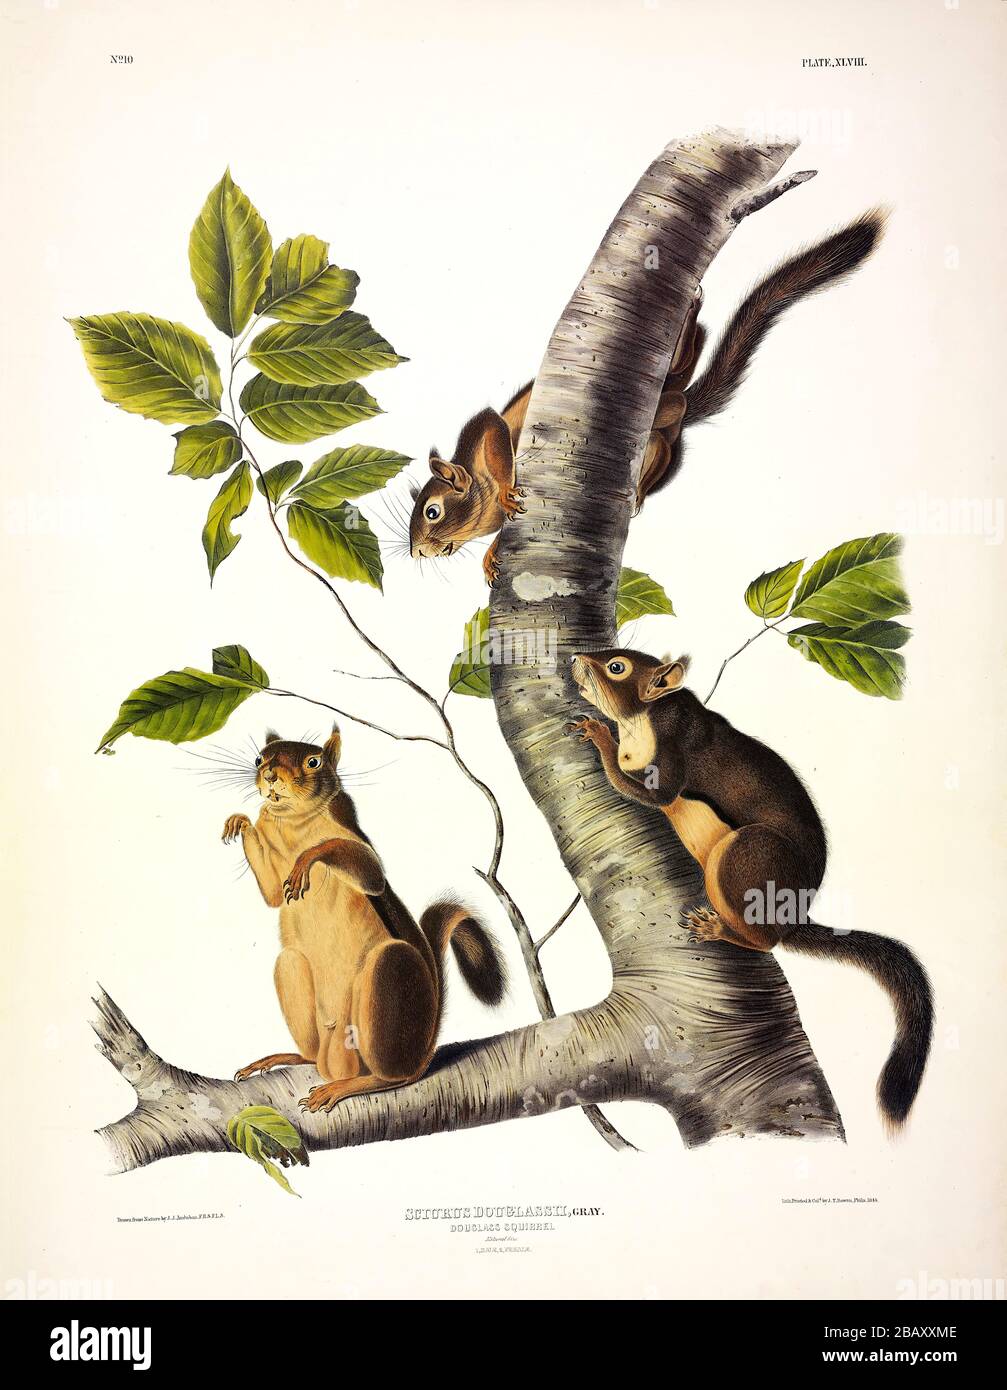 Plate 48 Douglass Squirrel  from The Viviparous Quadrupeds of North America, John James Audubon, Very high resolution and quality edited image Stock Photo